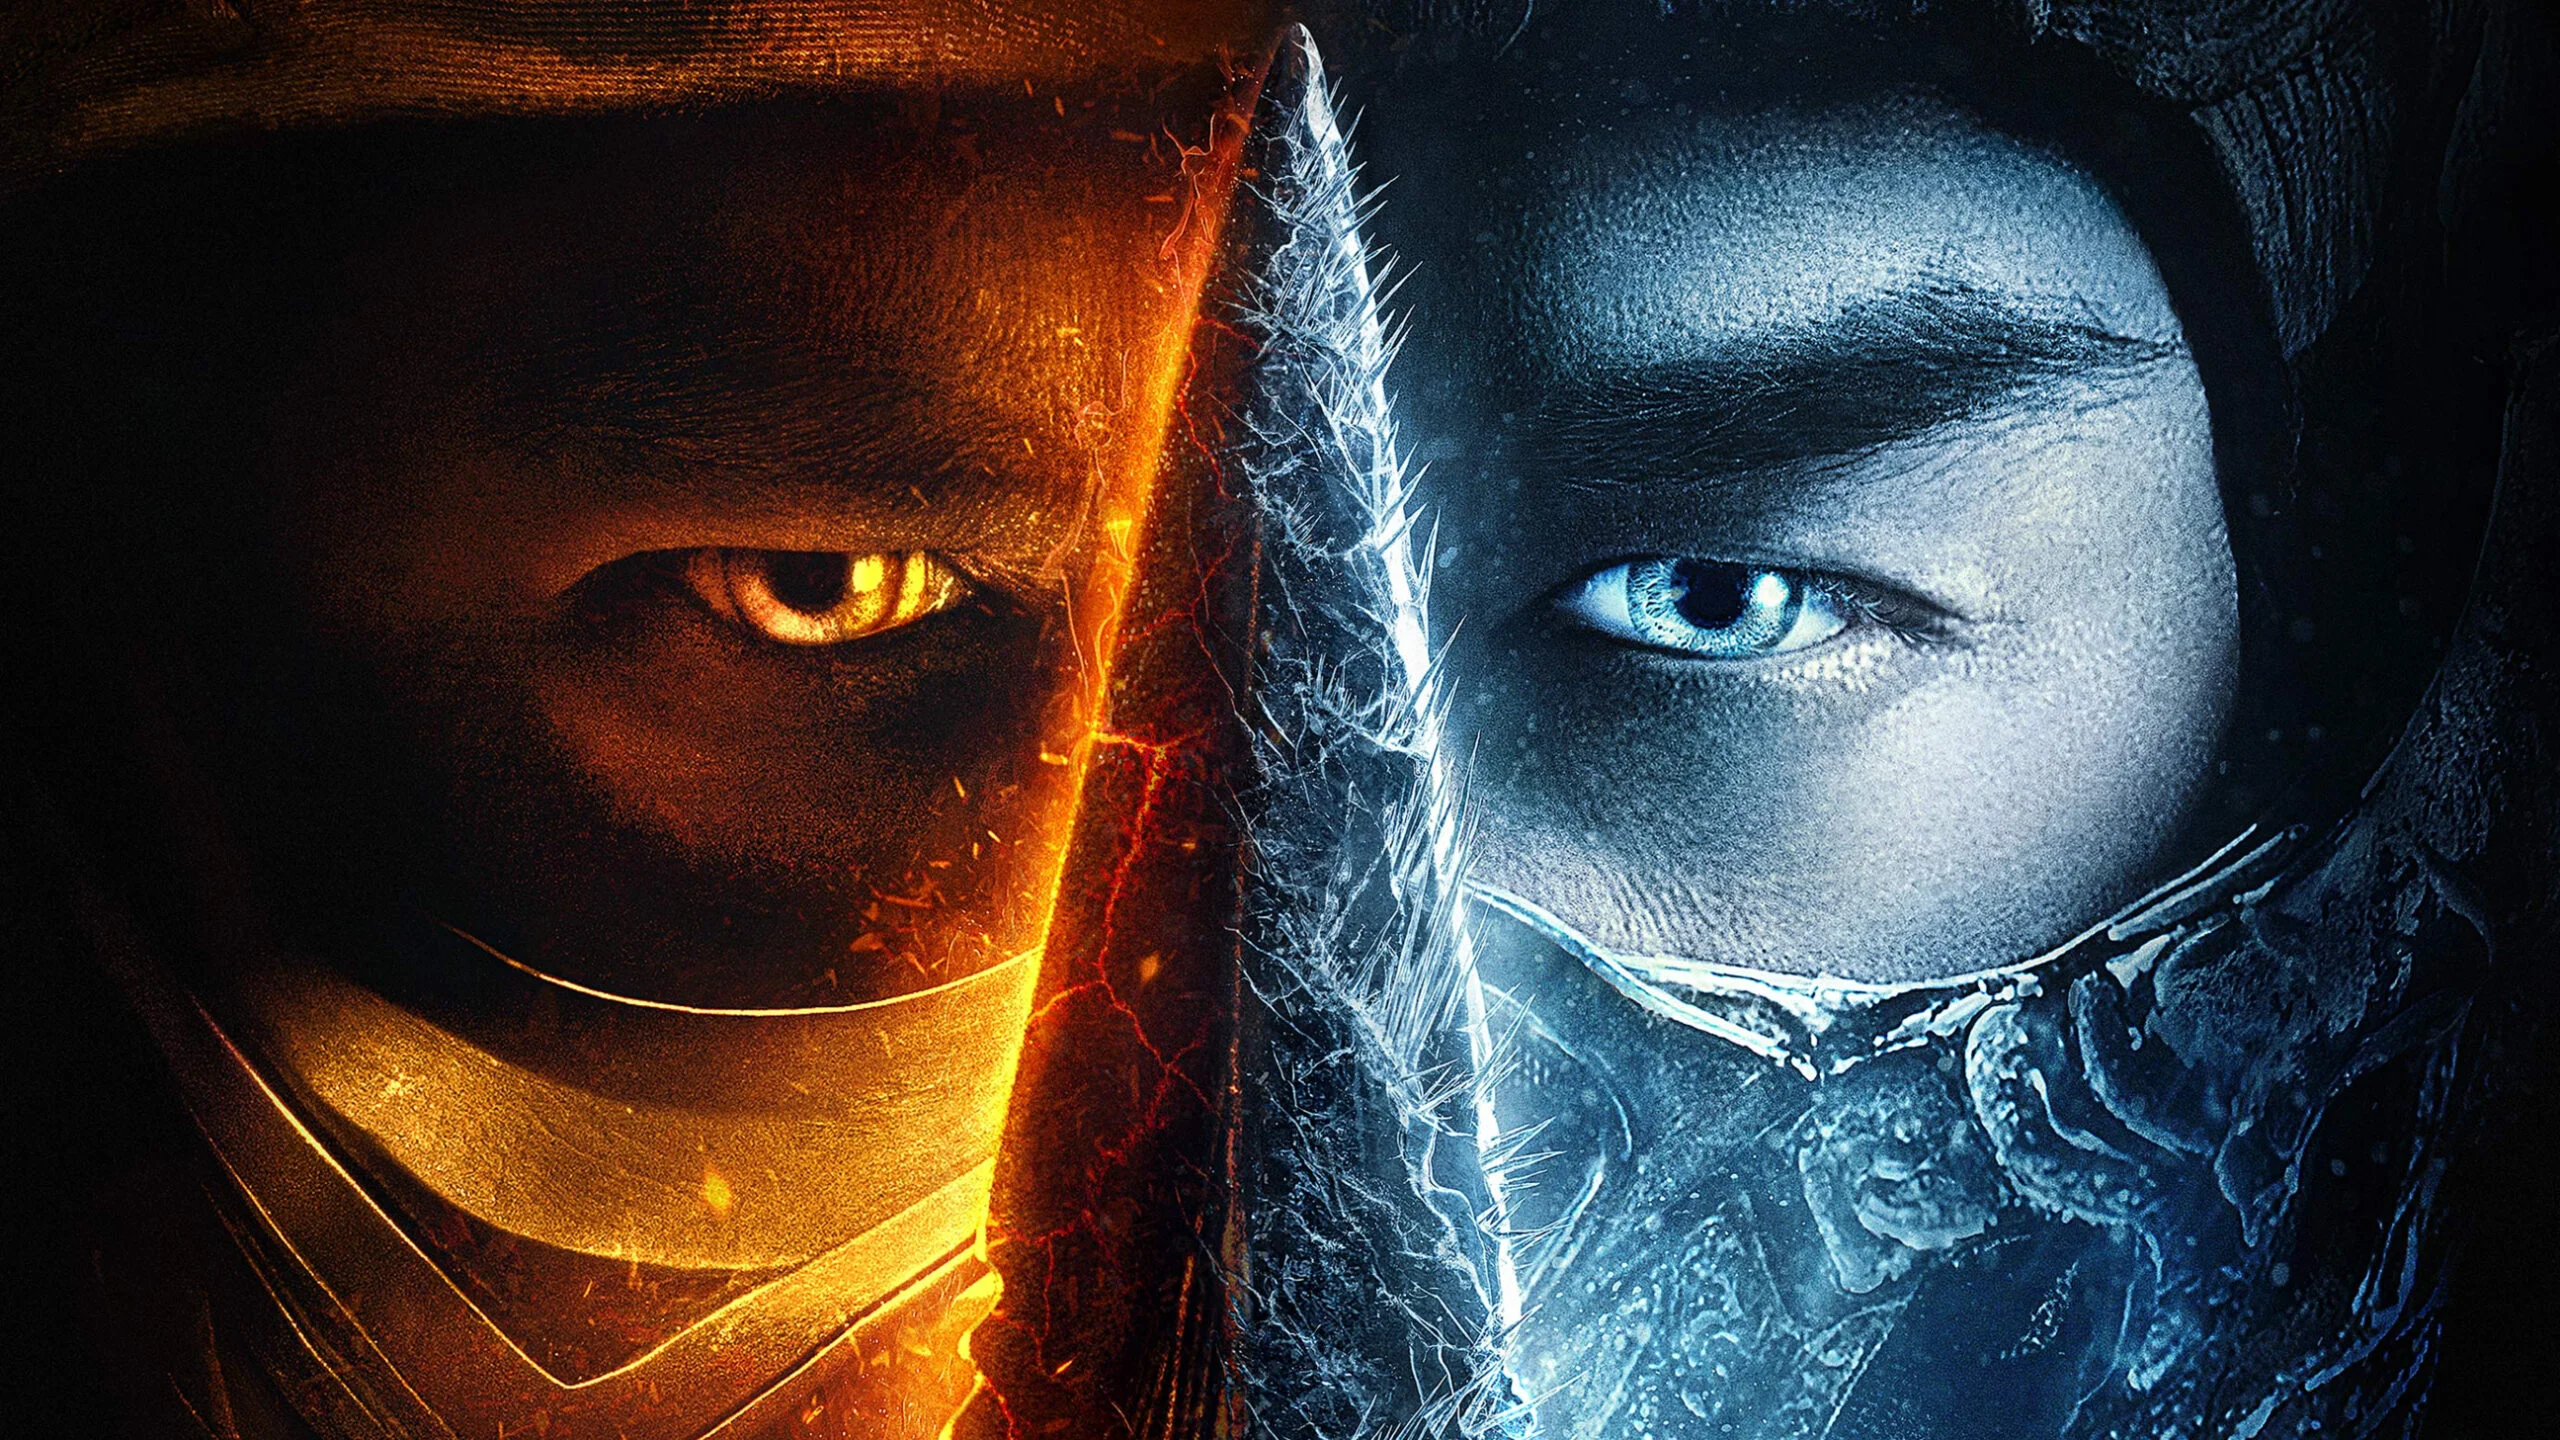 High-quality script and focus on the wishes of the fans: what is going to surprise the Mortal Kombat sequel?